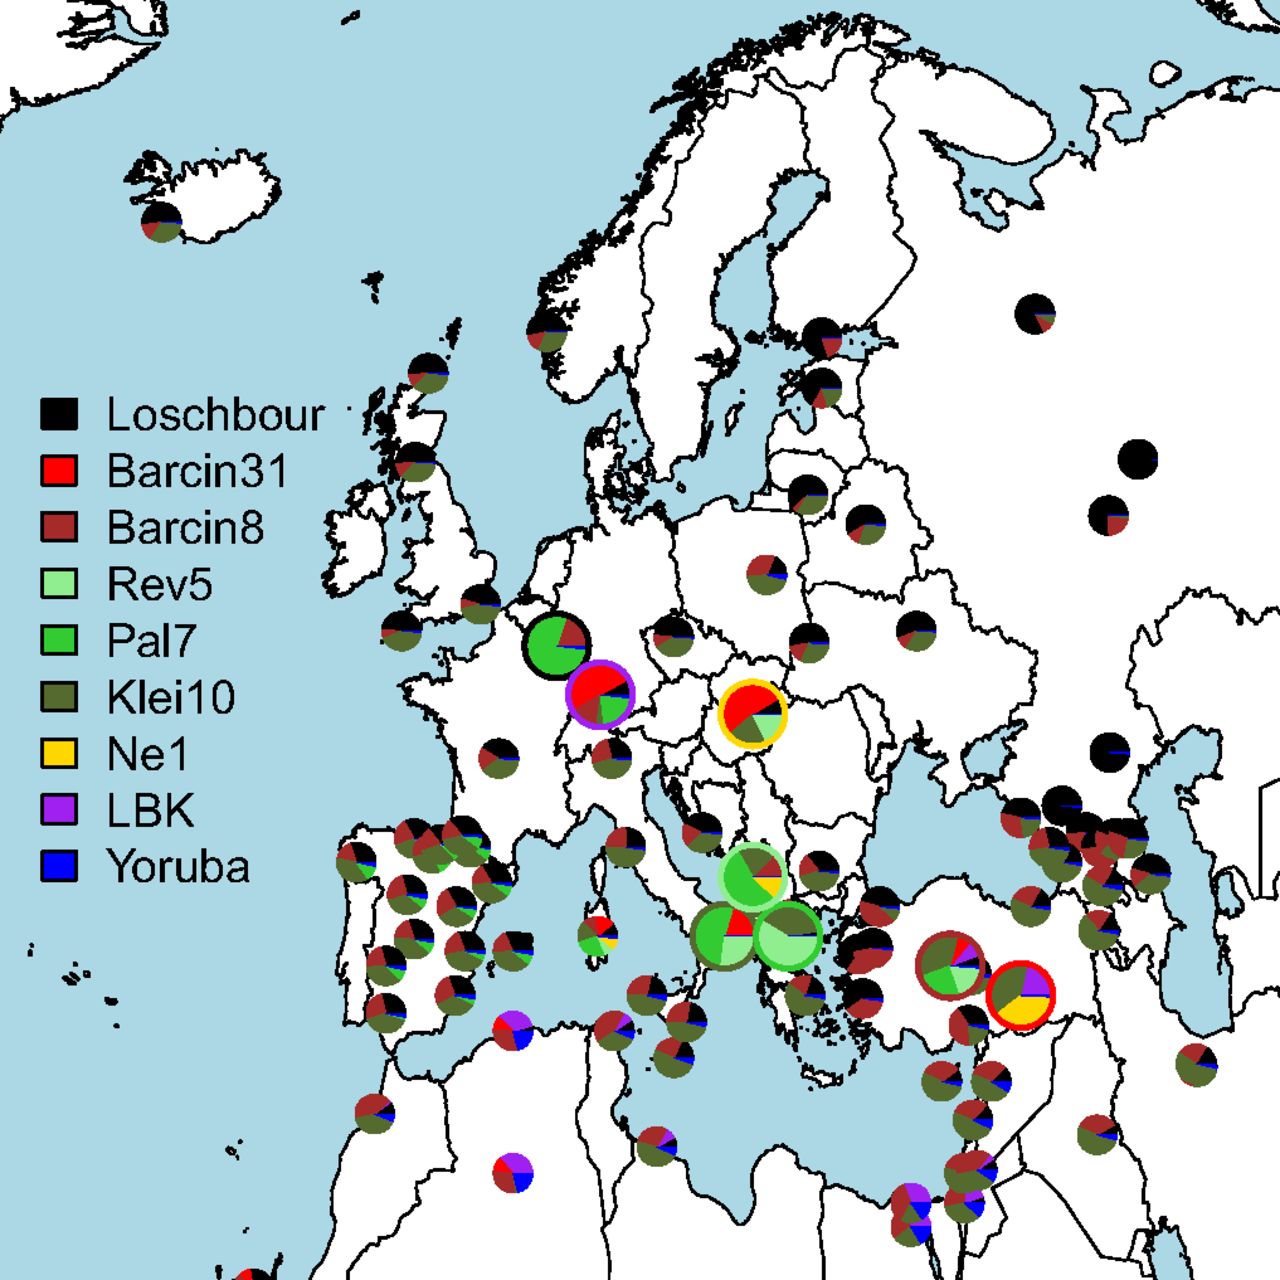 (F:Hofmanová, Zuzana, et al. "Early farmers from across Europe directly descended from Neolithic Aegeans." PNAS, 2016.)